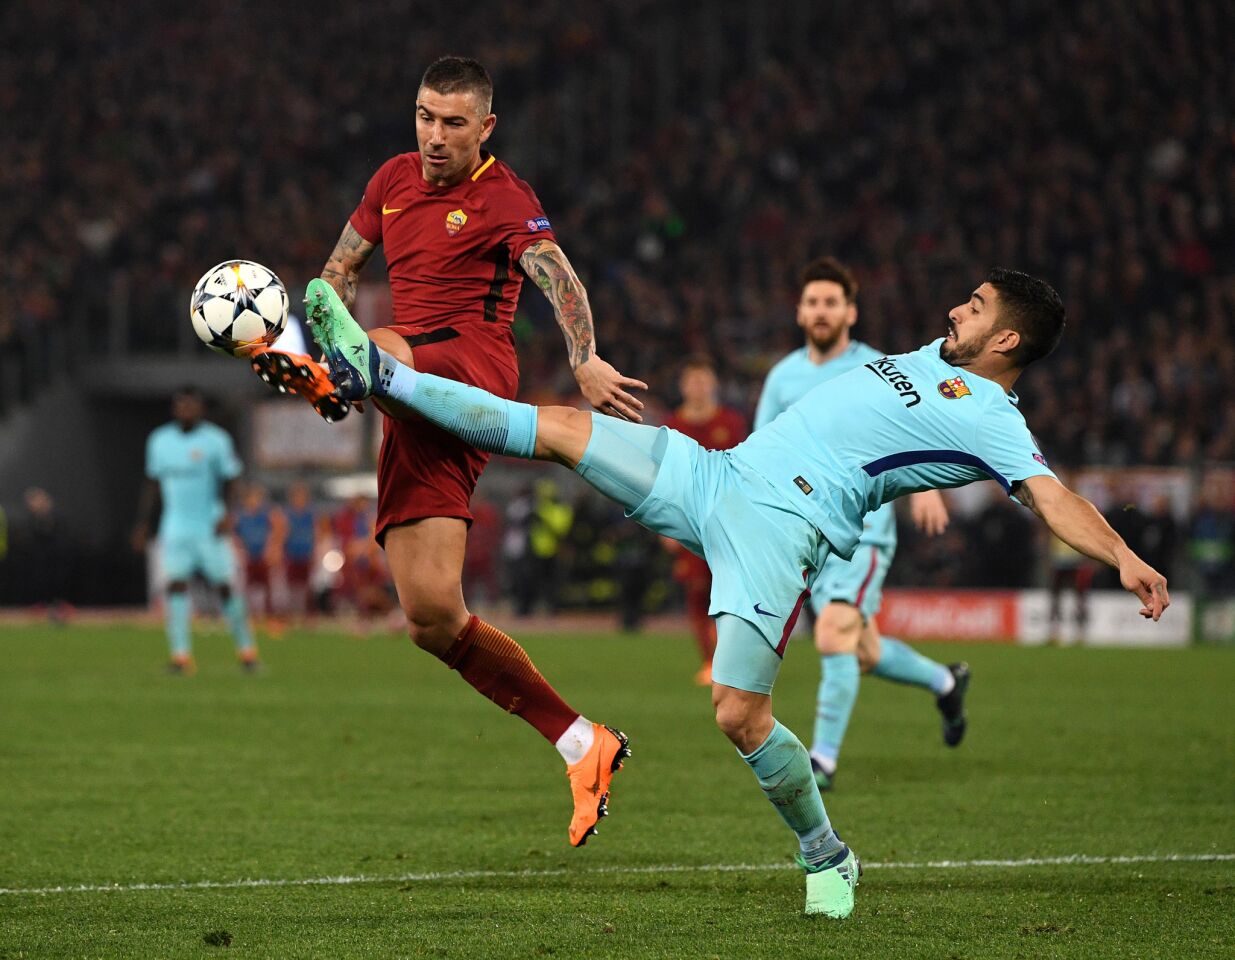 ROME, ITALY - APRIL 10: Aleksandar Kolarov of AS Roma is challenged by Luis Suarez of Barcelona UEFA Champions League Quarter Final Second Leg match between AS Roma and FC Barcelona at Stadio Olimpico on April 10, 2018 in Rome, Italy.